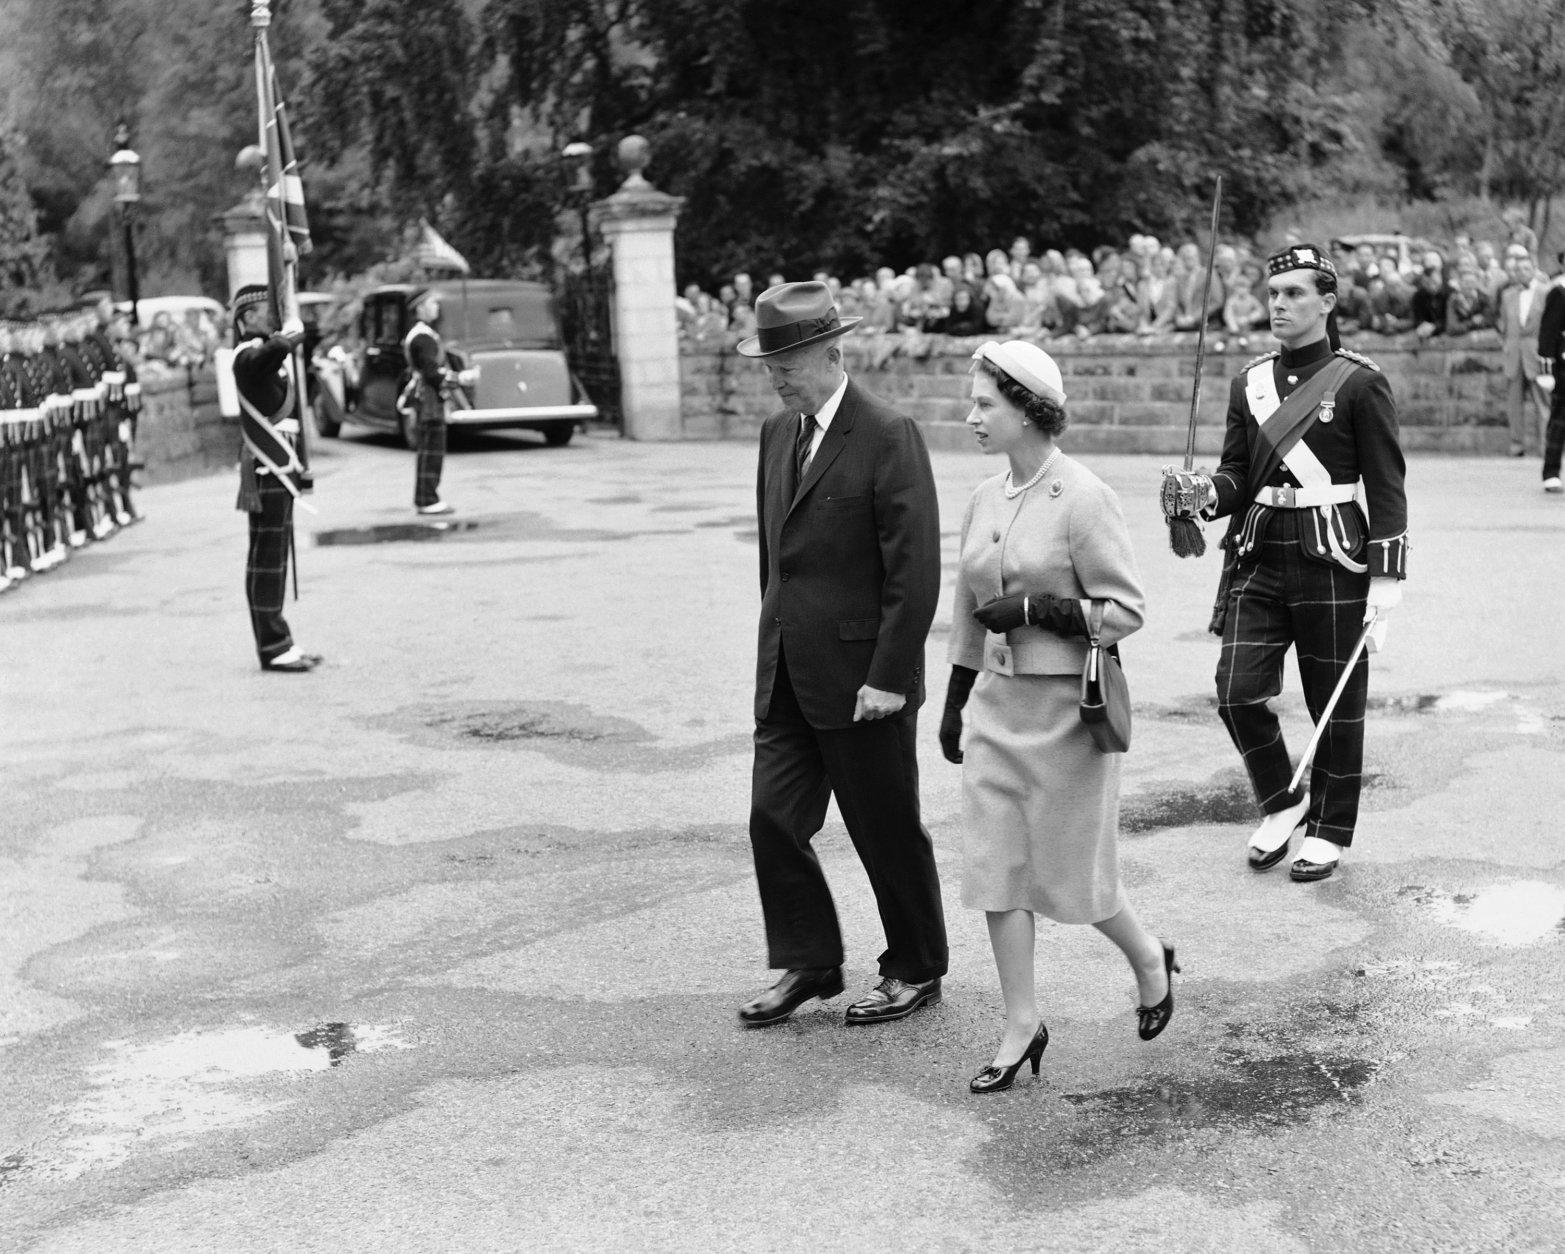 President Dwight D. Eisenhower walks through the grounds of Balmoral Castle in Scotland, Aug. 28, 1959 with Queen Elizabeth II after his arrival from London. They are followed by a soldier bearing the Queen's sword. (AP Photo)